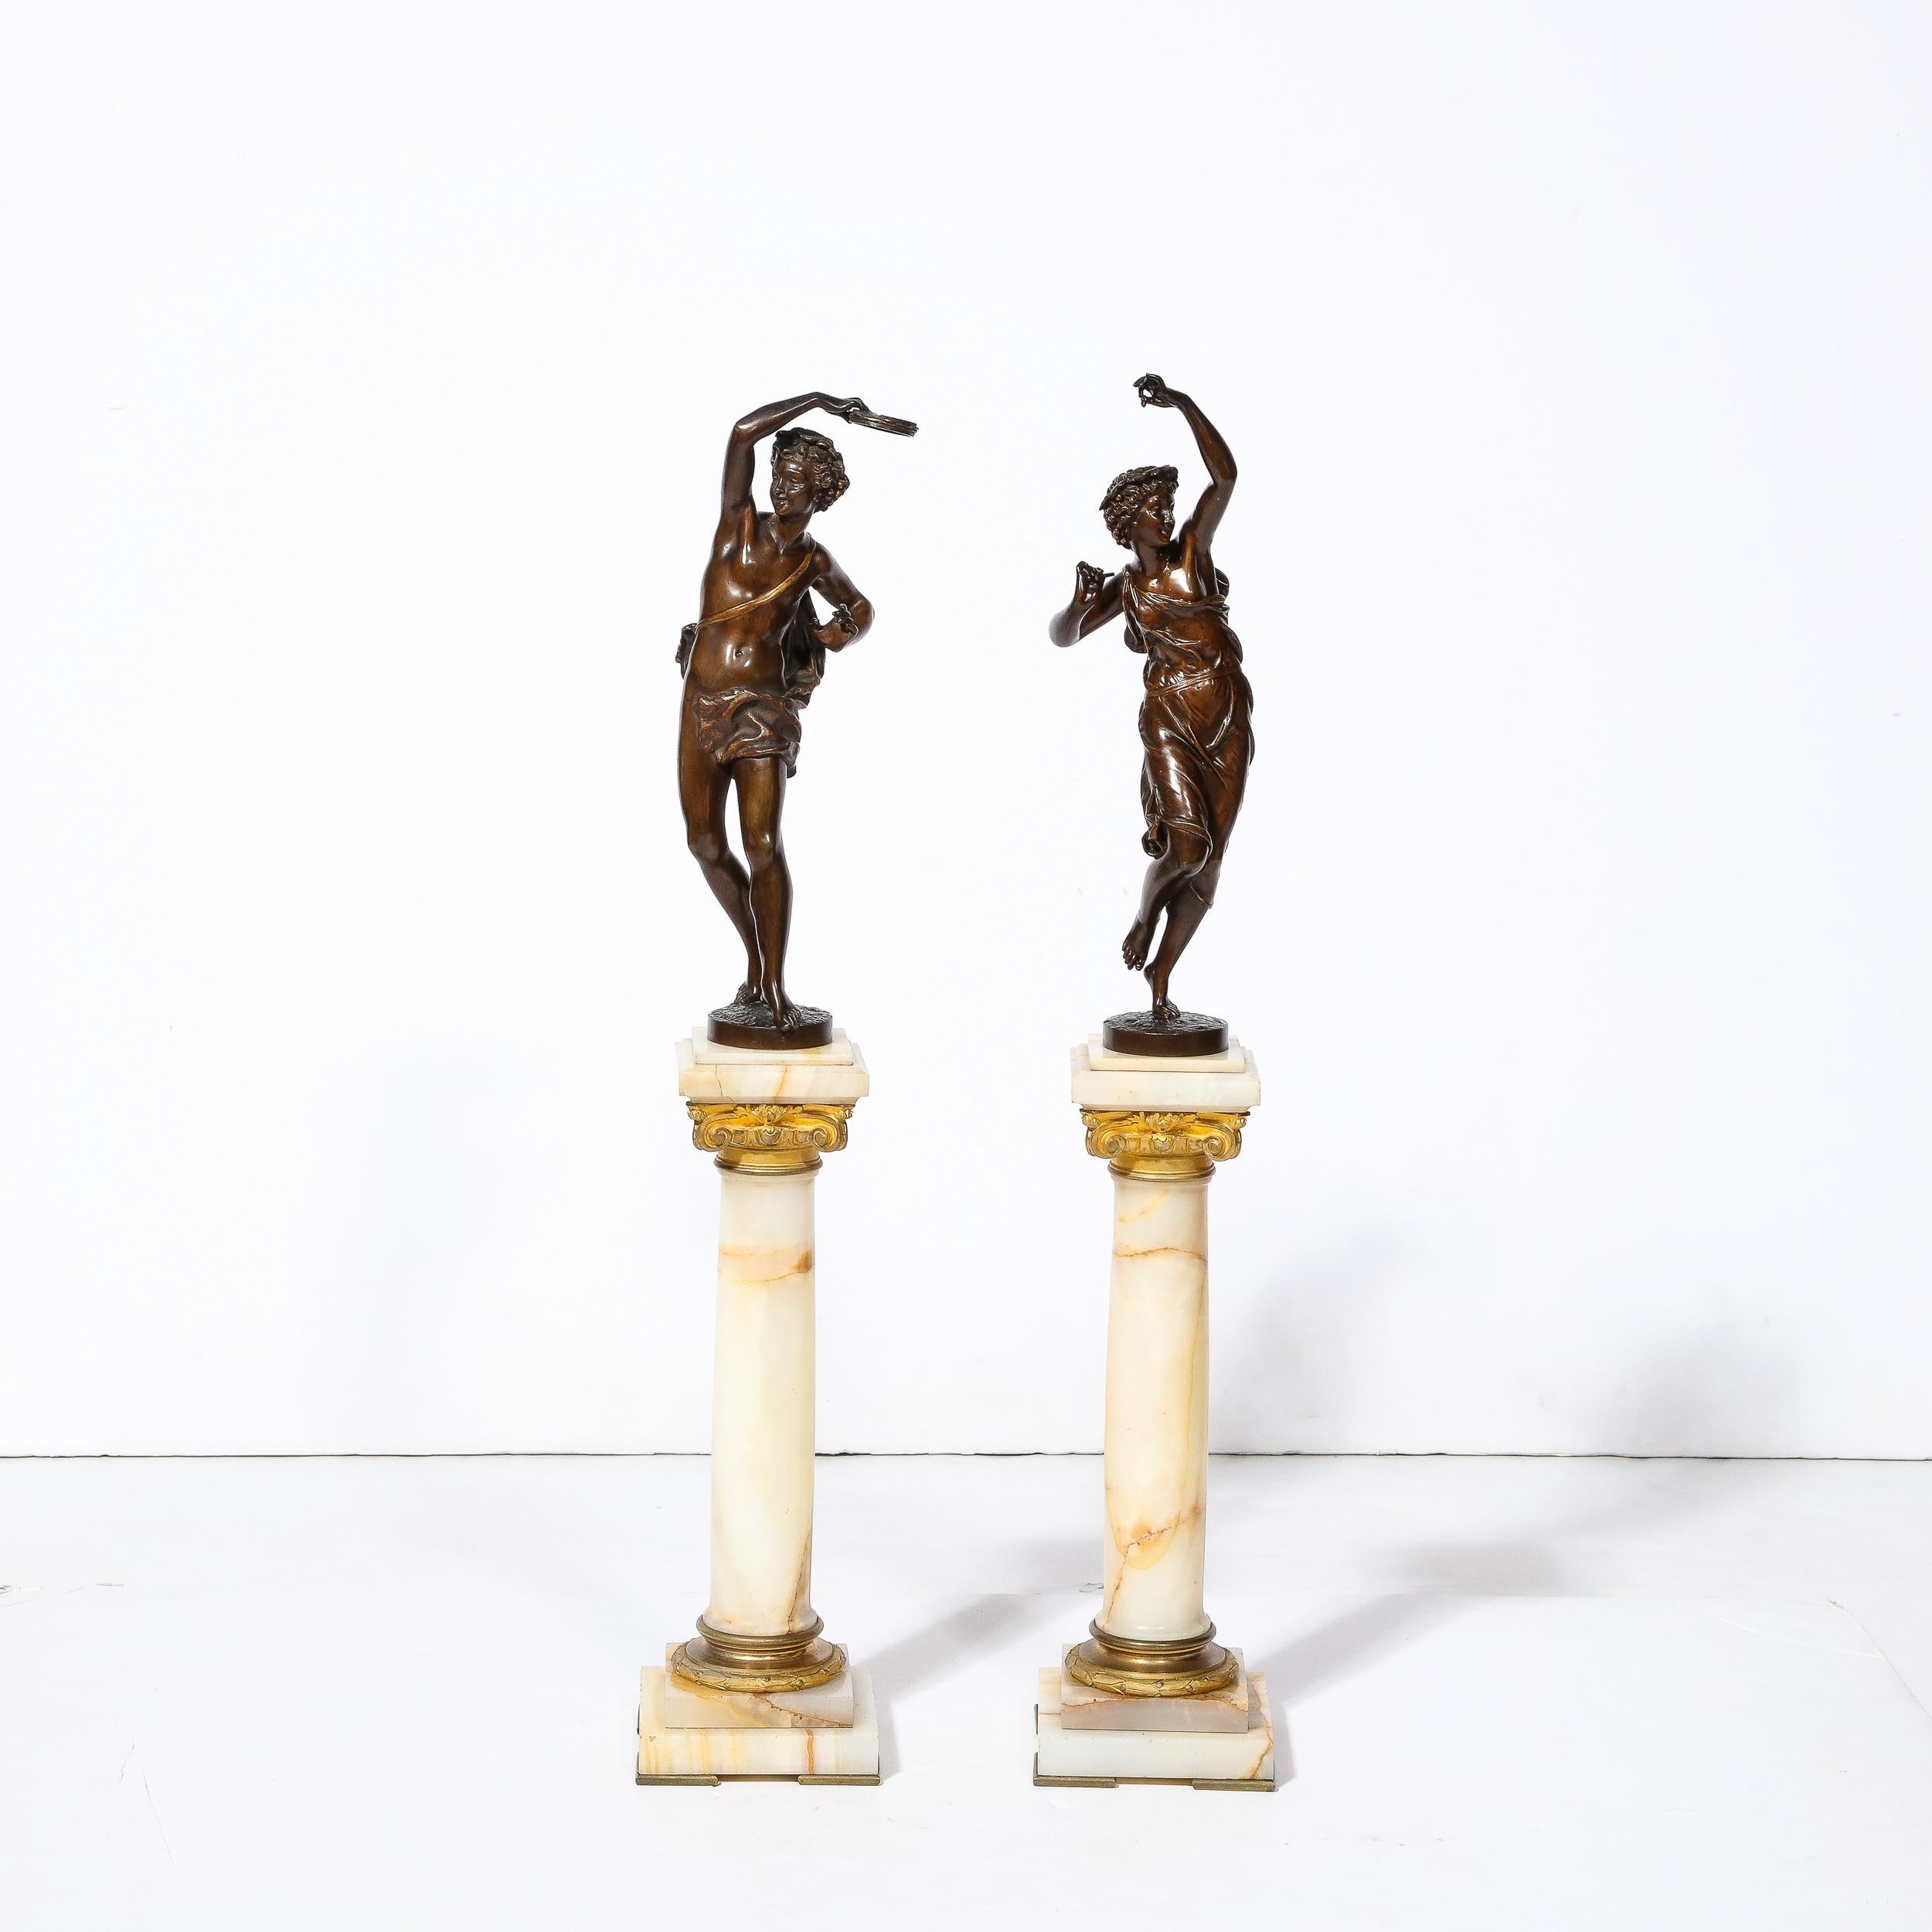 This charming pair of Neoclassical Bronze Bacchantes sculptures by Earnest Rancoulet originate from France, Circa 1900. These young and playful mythological figures are followers of Dionysus, engaging in rituals of dance and exuberance while clothed